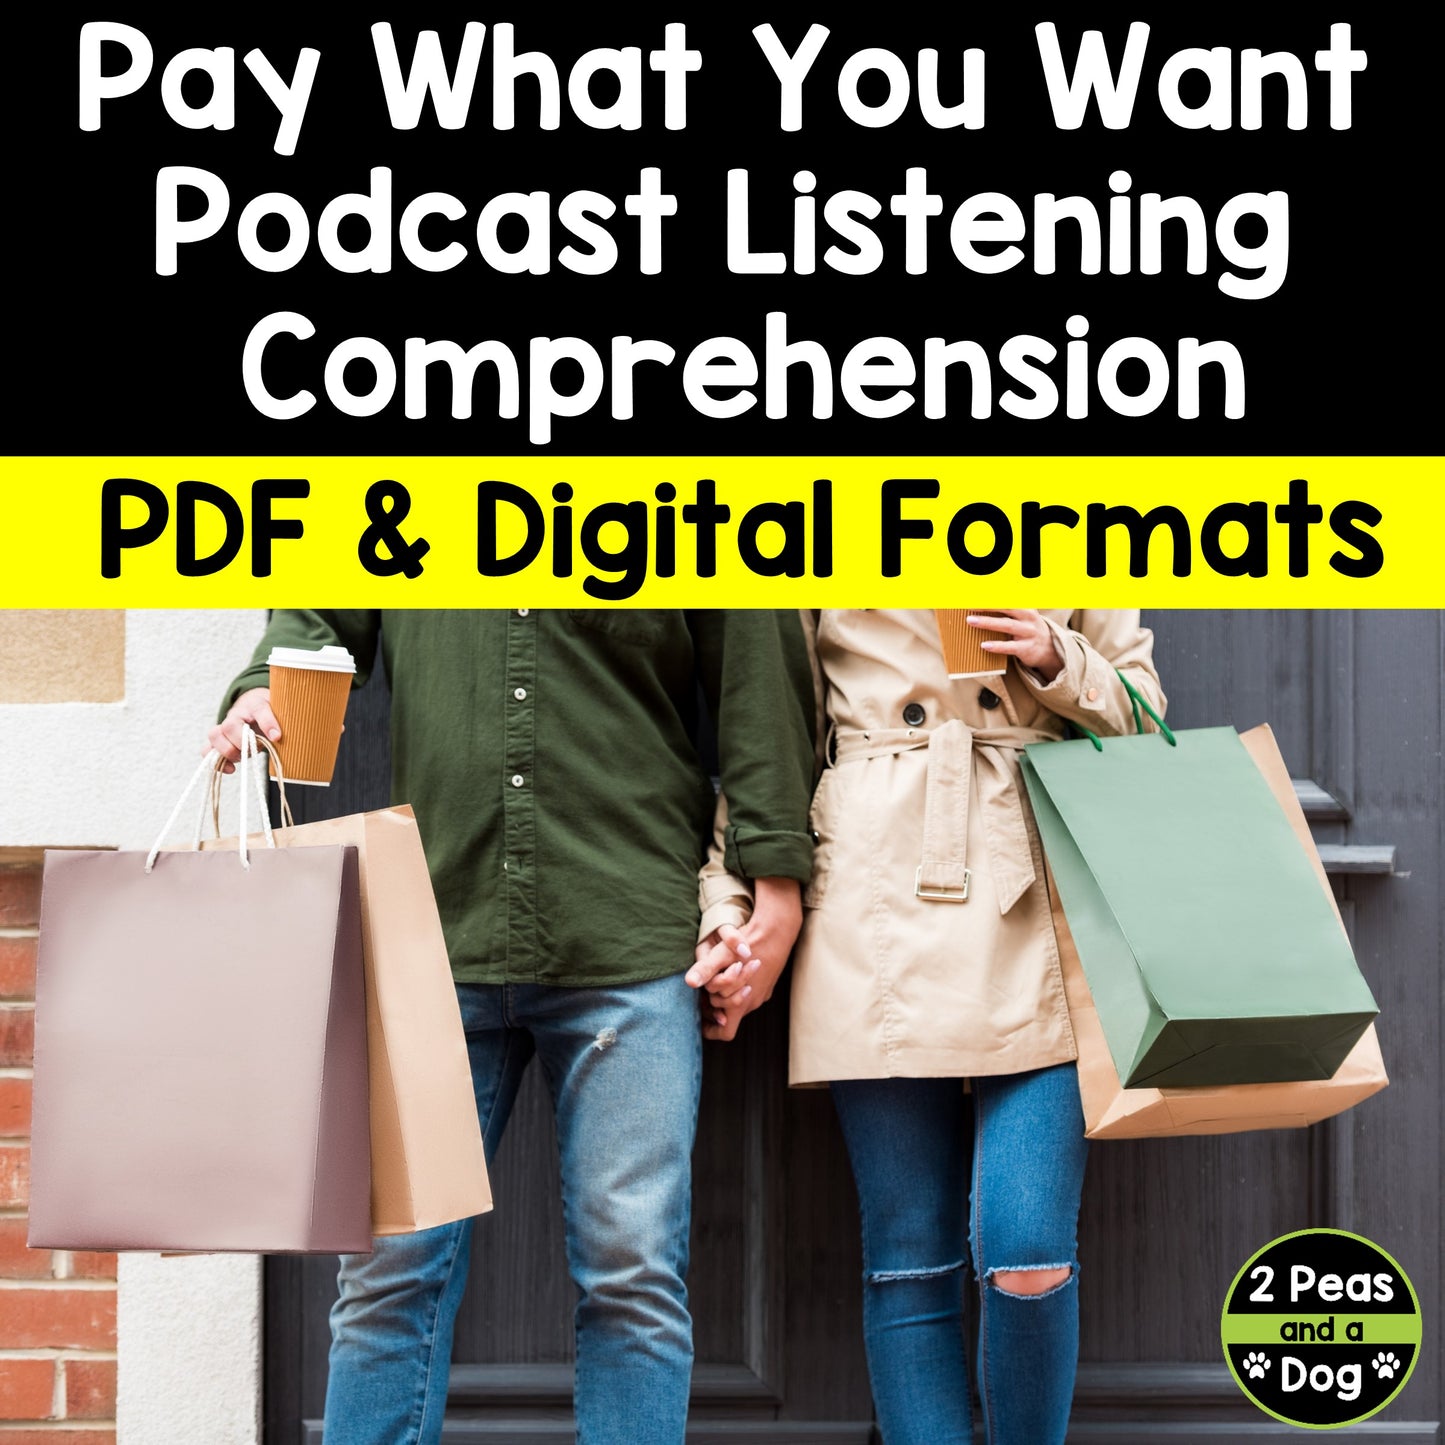 Podcast Listening Comprehension Lesson - Pay What You Want Stores